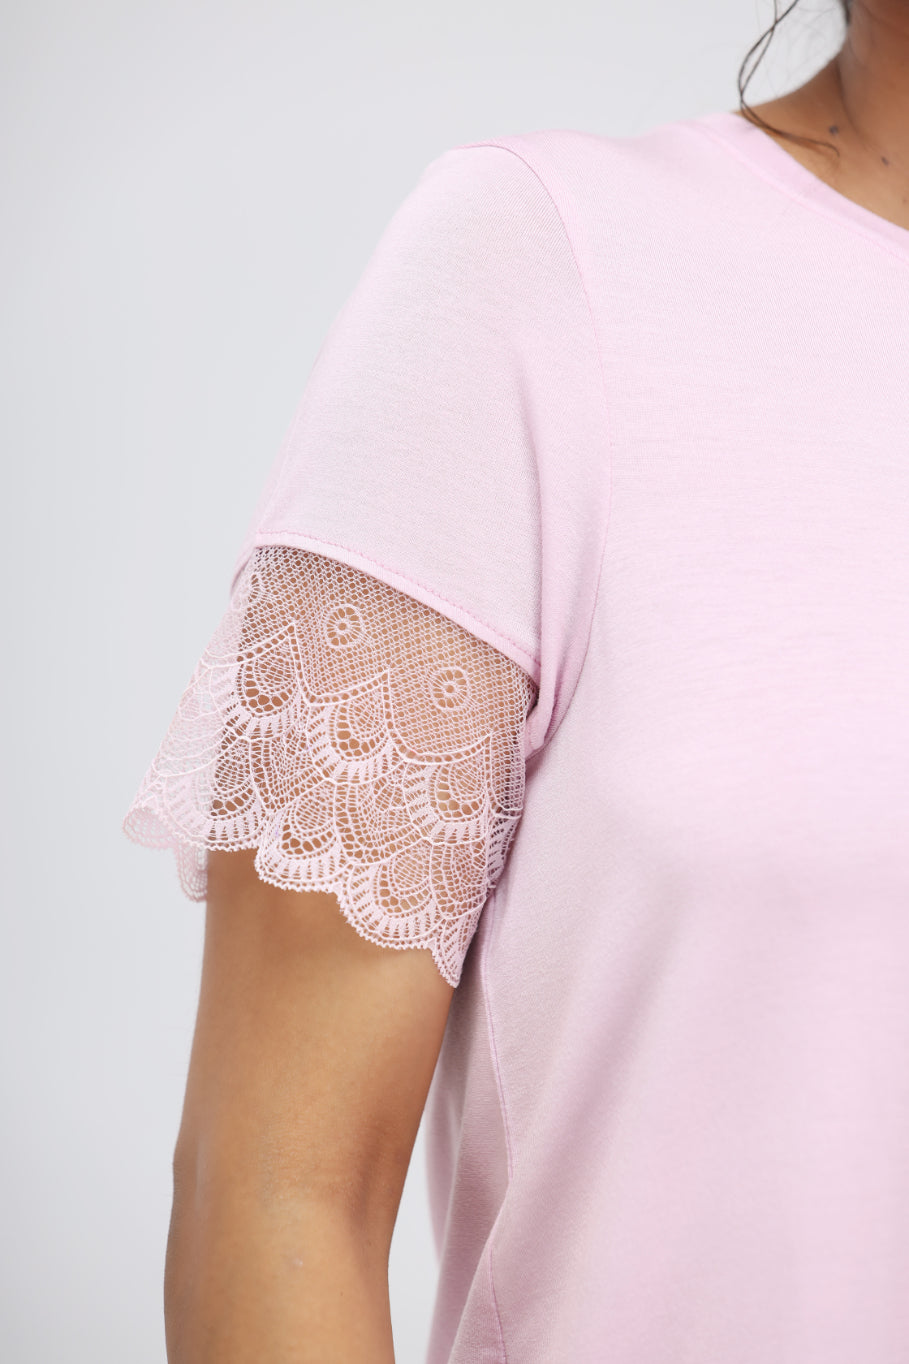 Soft Pink Modal Lace Top